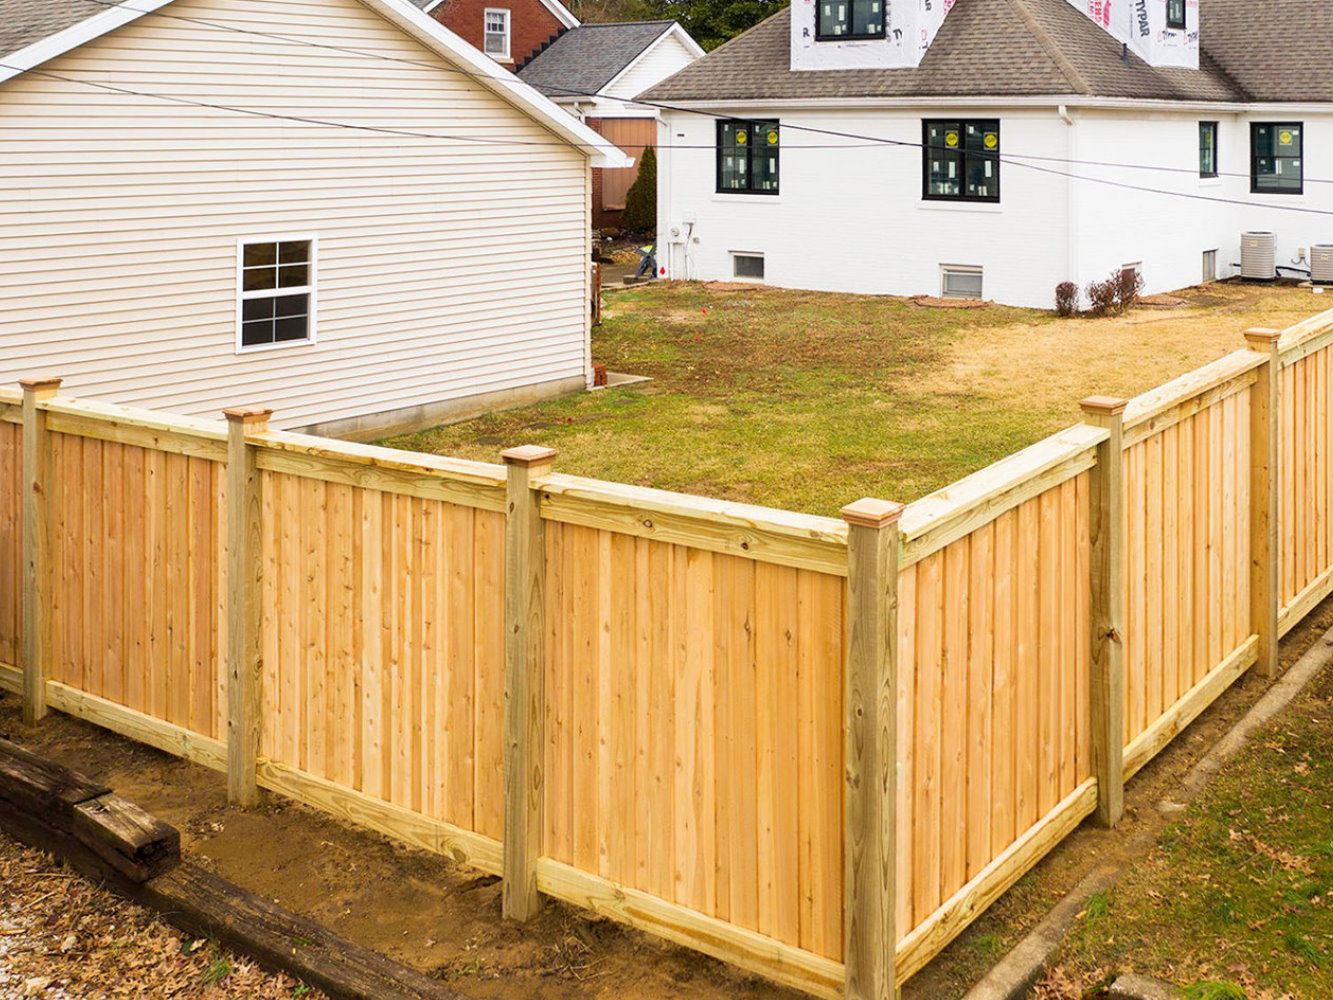 Sebree KY cap and trim style wood fence